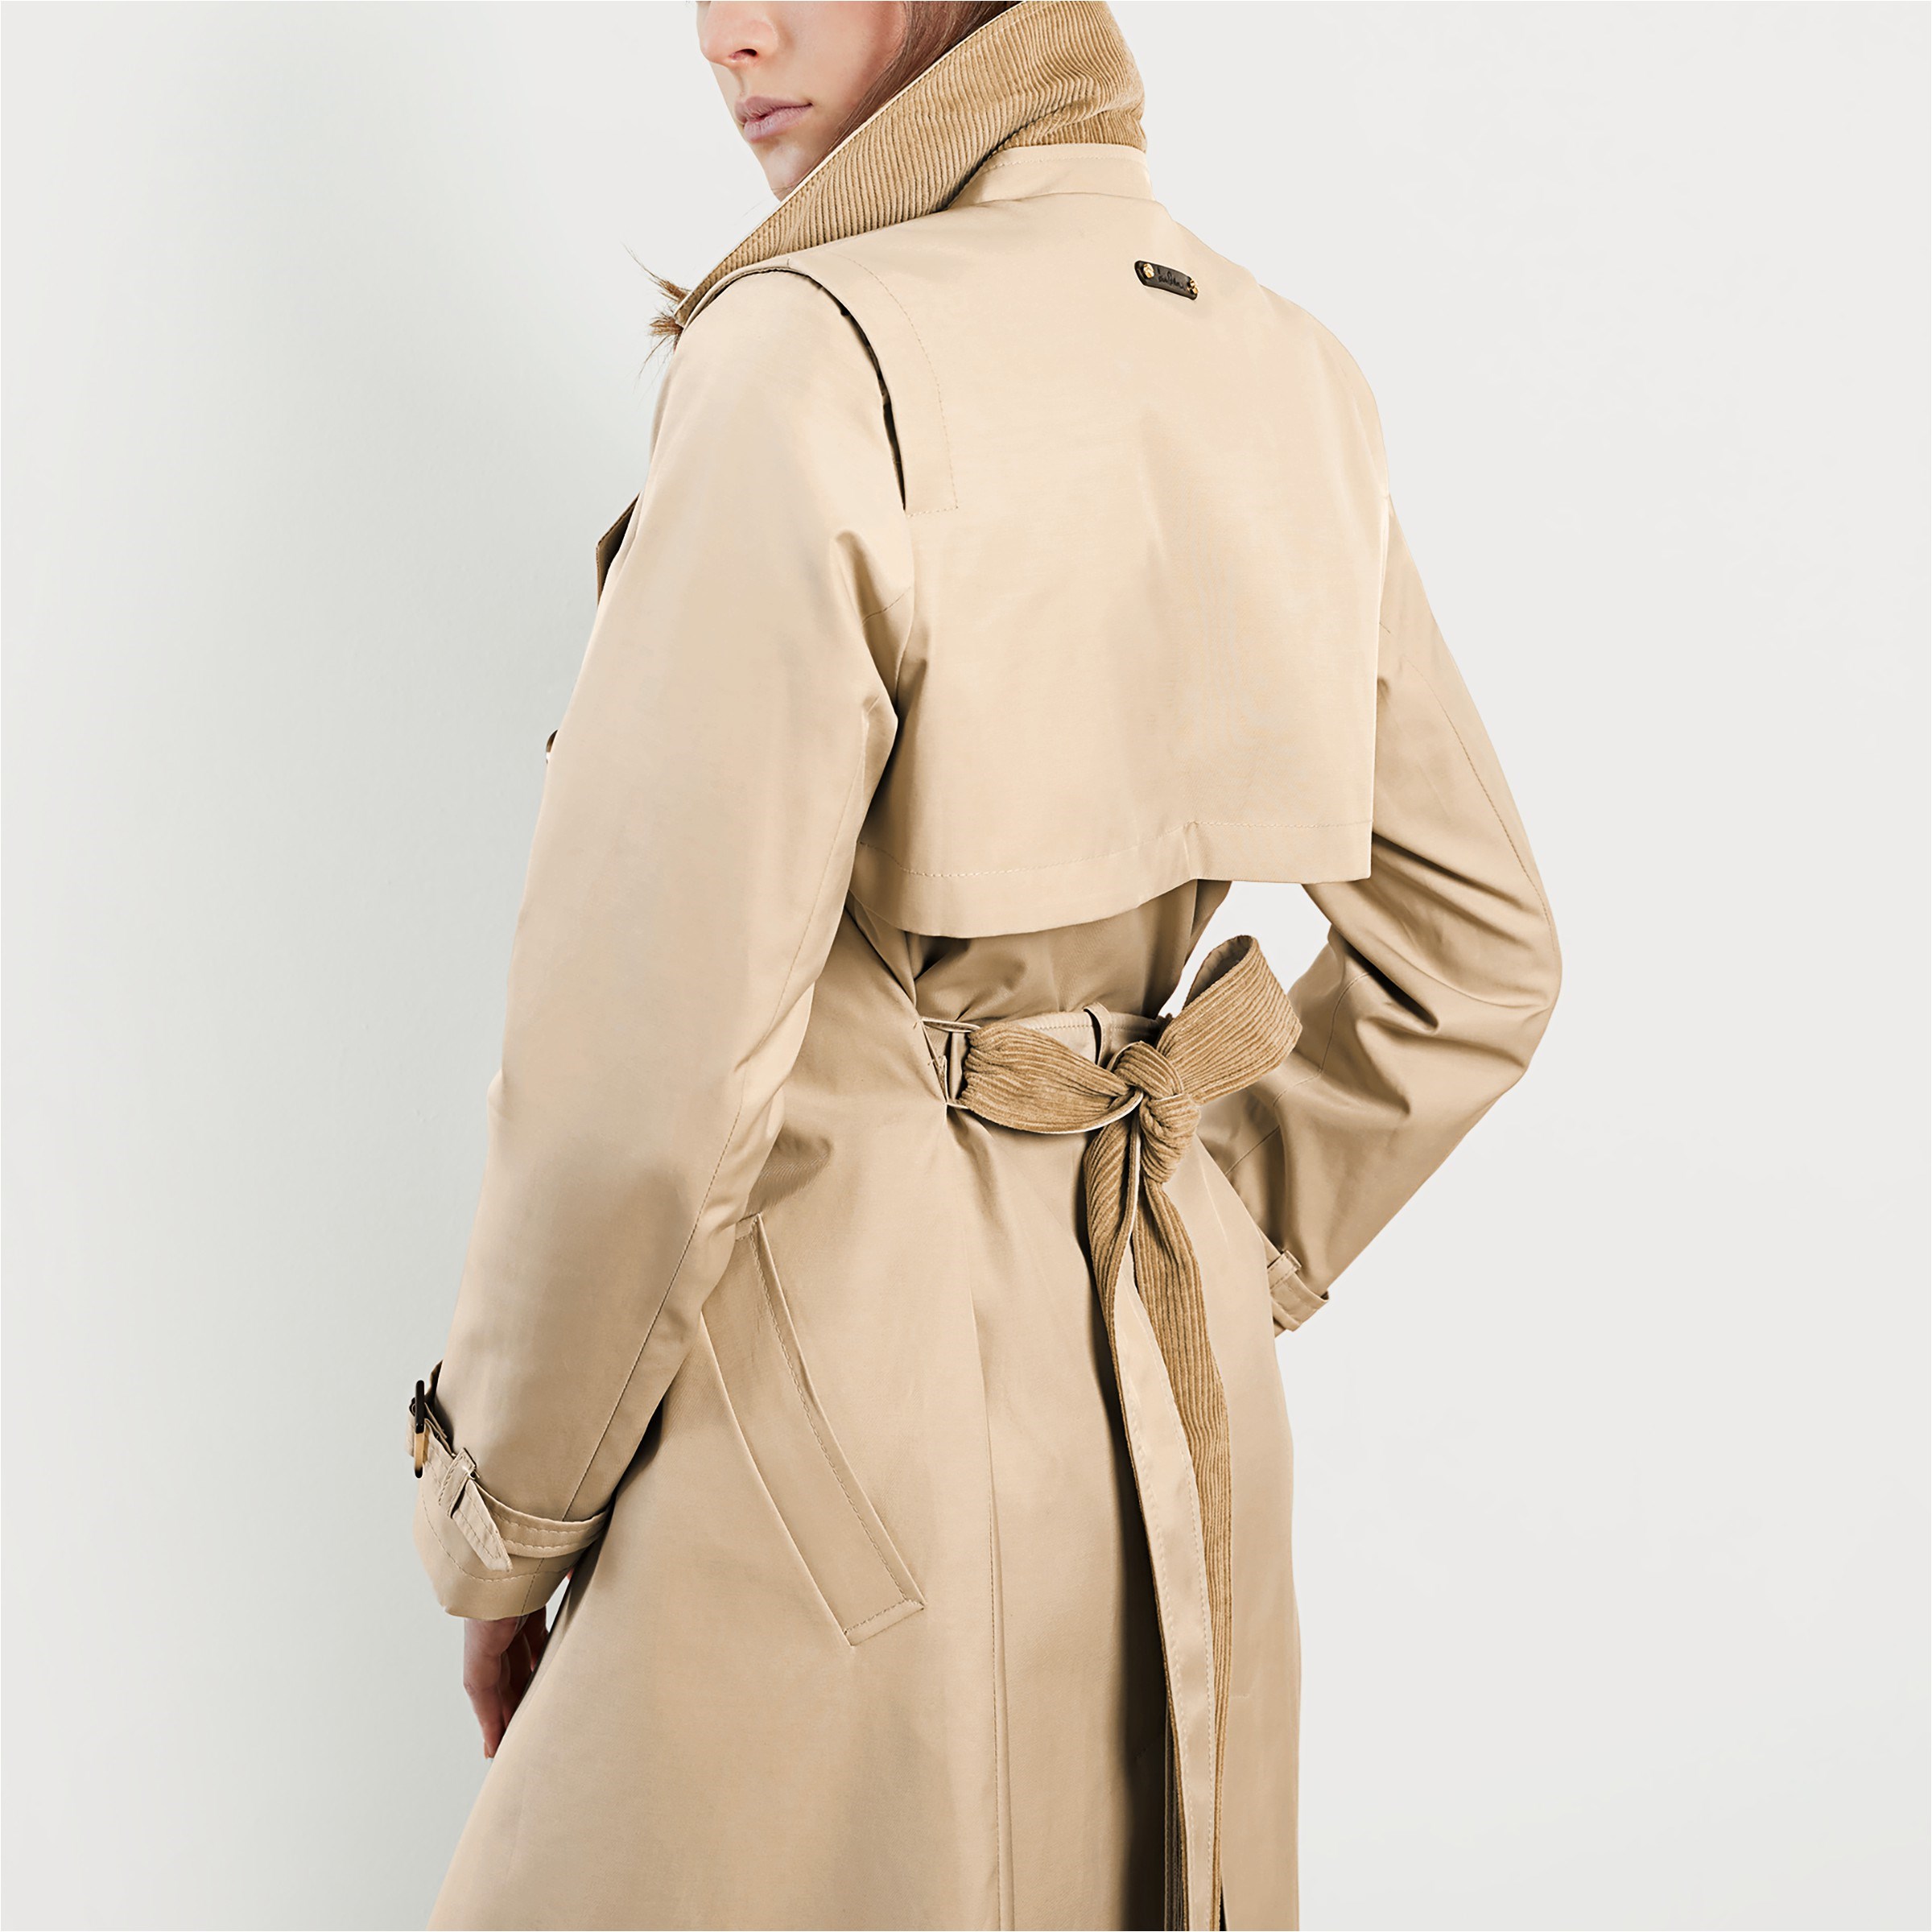 debitor maling Geologi Sam Edelman Belted Trench Coat | Women's Coats and Jackets